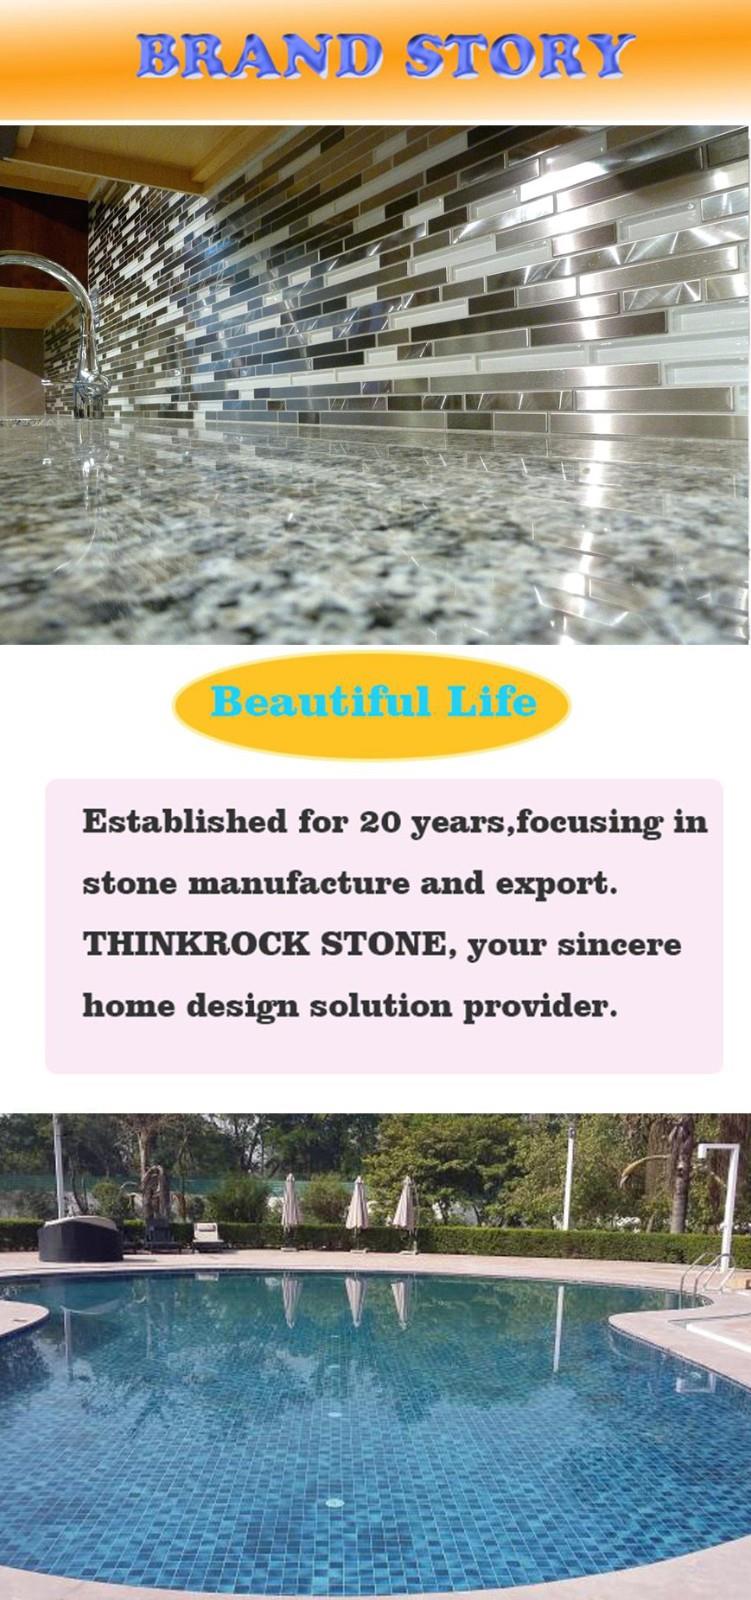 THINKROCK stone focusing in agate stone your home design solution provider.jpg